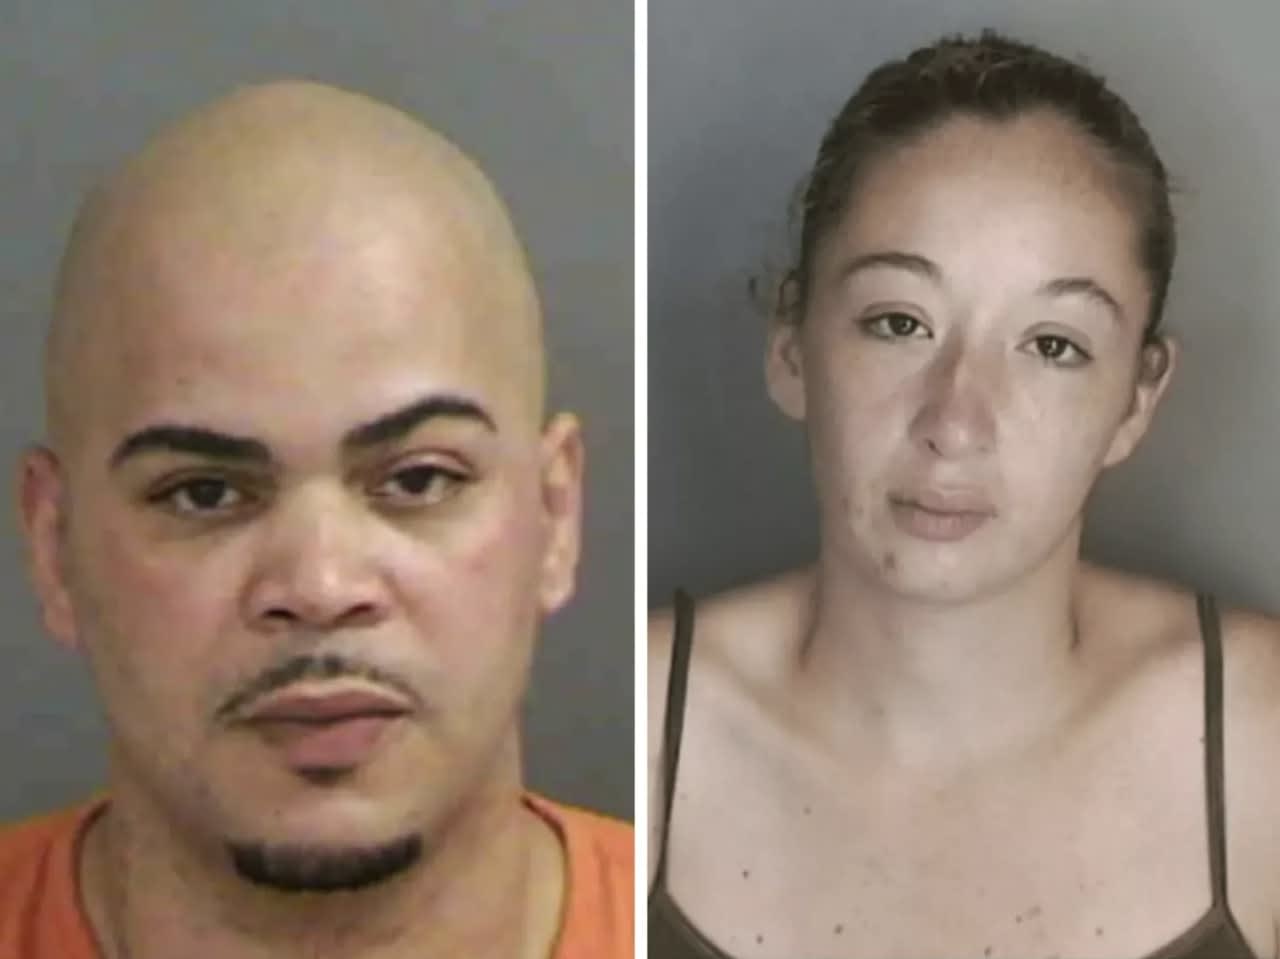 Florida resident Christopher Gonzalez (right) was sentenced to prison for strangling Yonkers resident Angel Serbay in 2005 and leaving her body on the shoulder of a parkway.